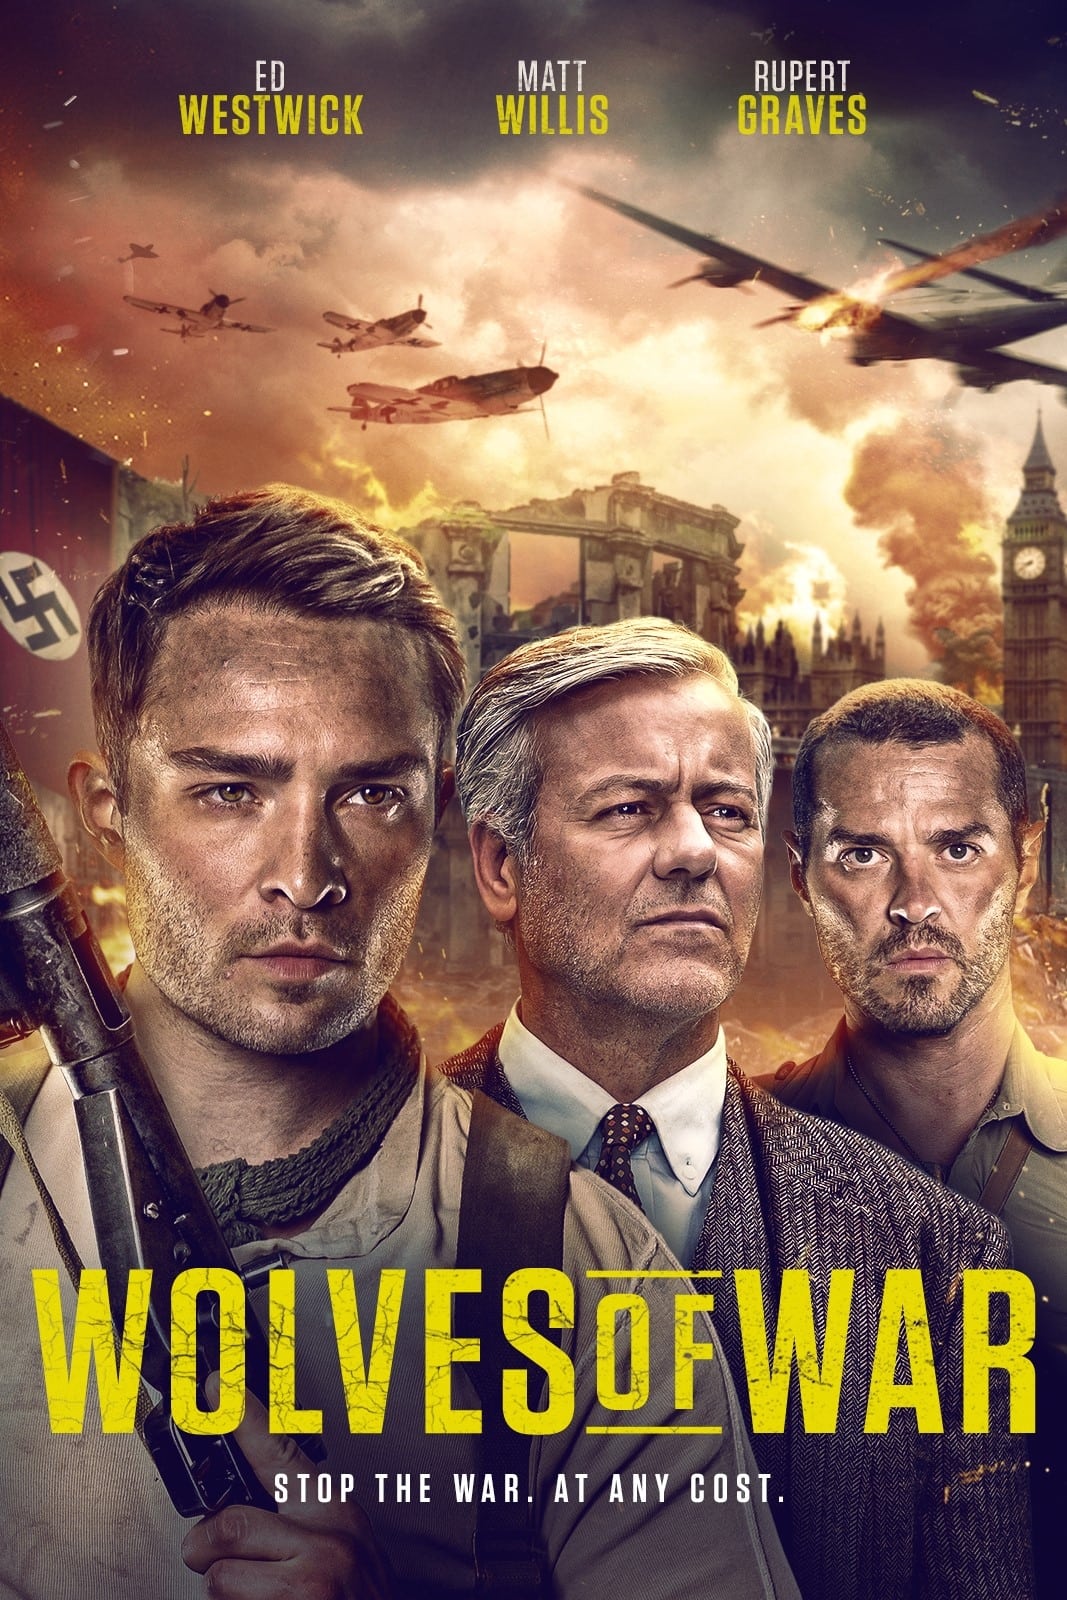 Poster for the movie "Wolves of War"